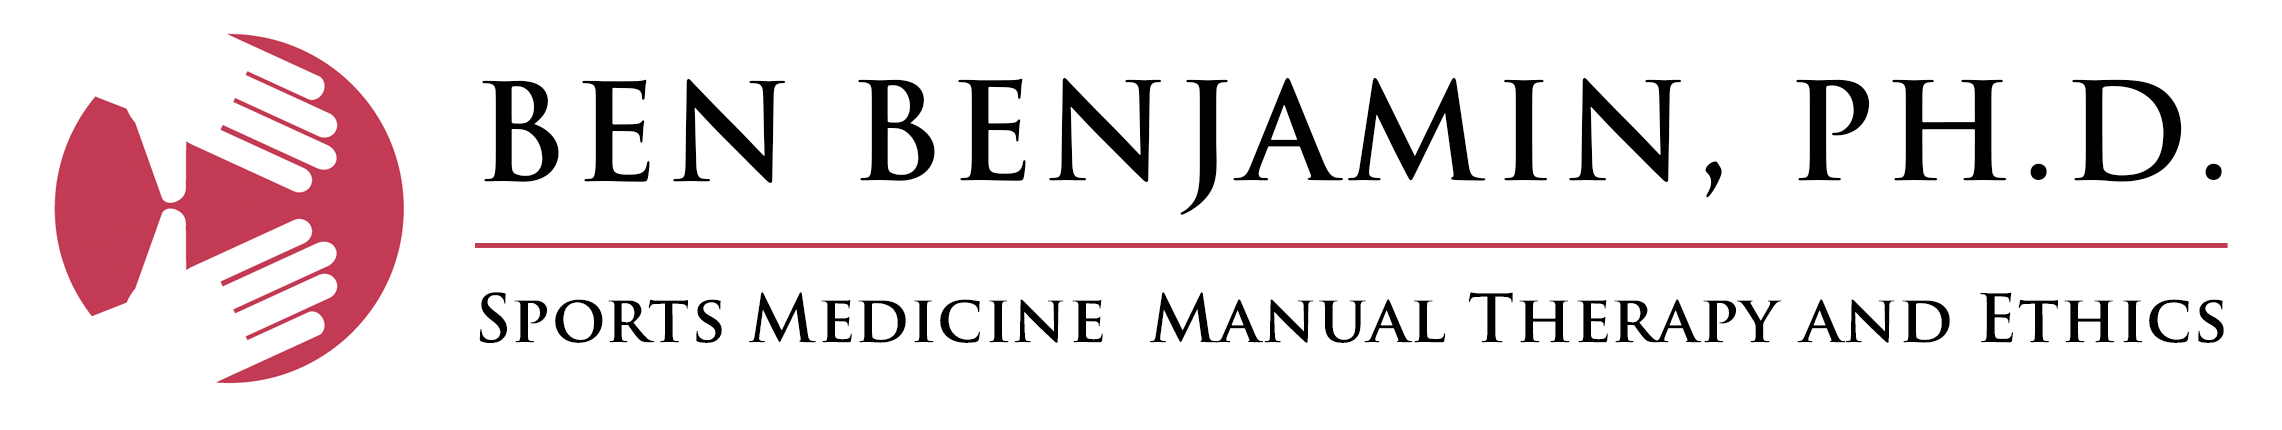 Ben Benjamin PH.D. - Sports Medicine  Manual Therapy and Ethics